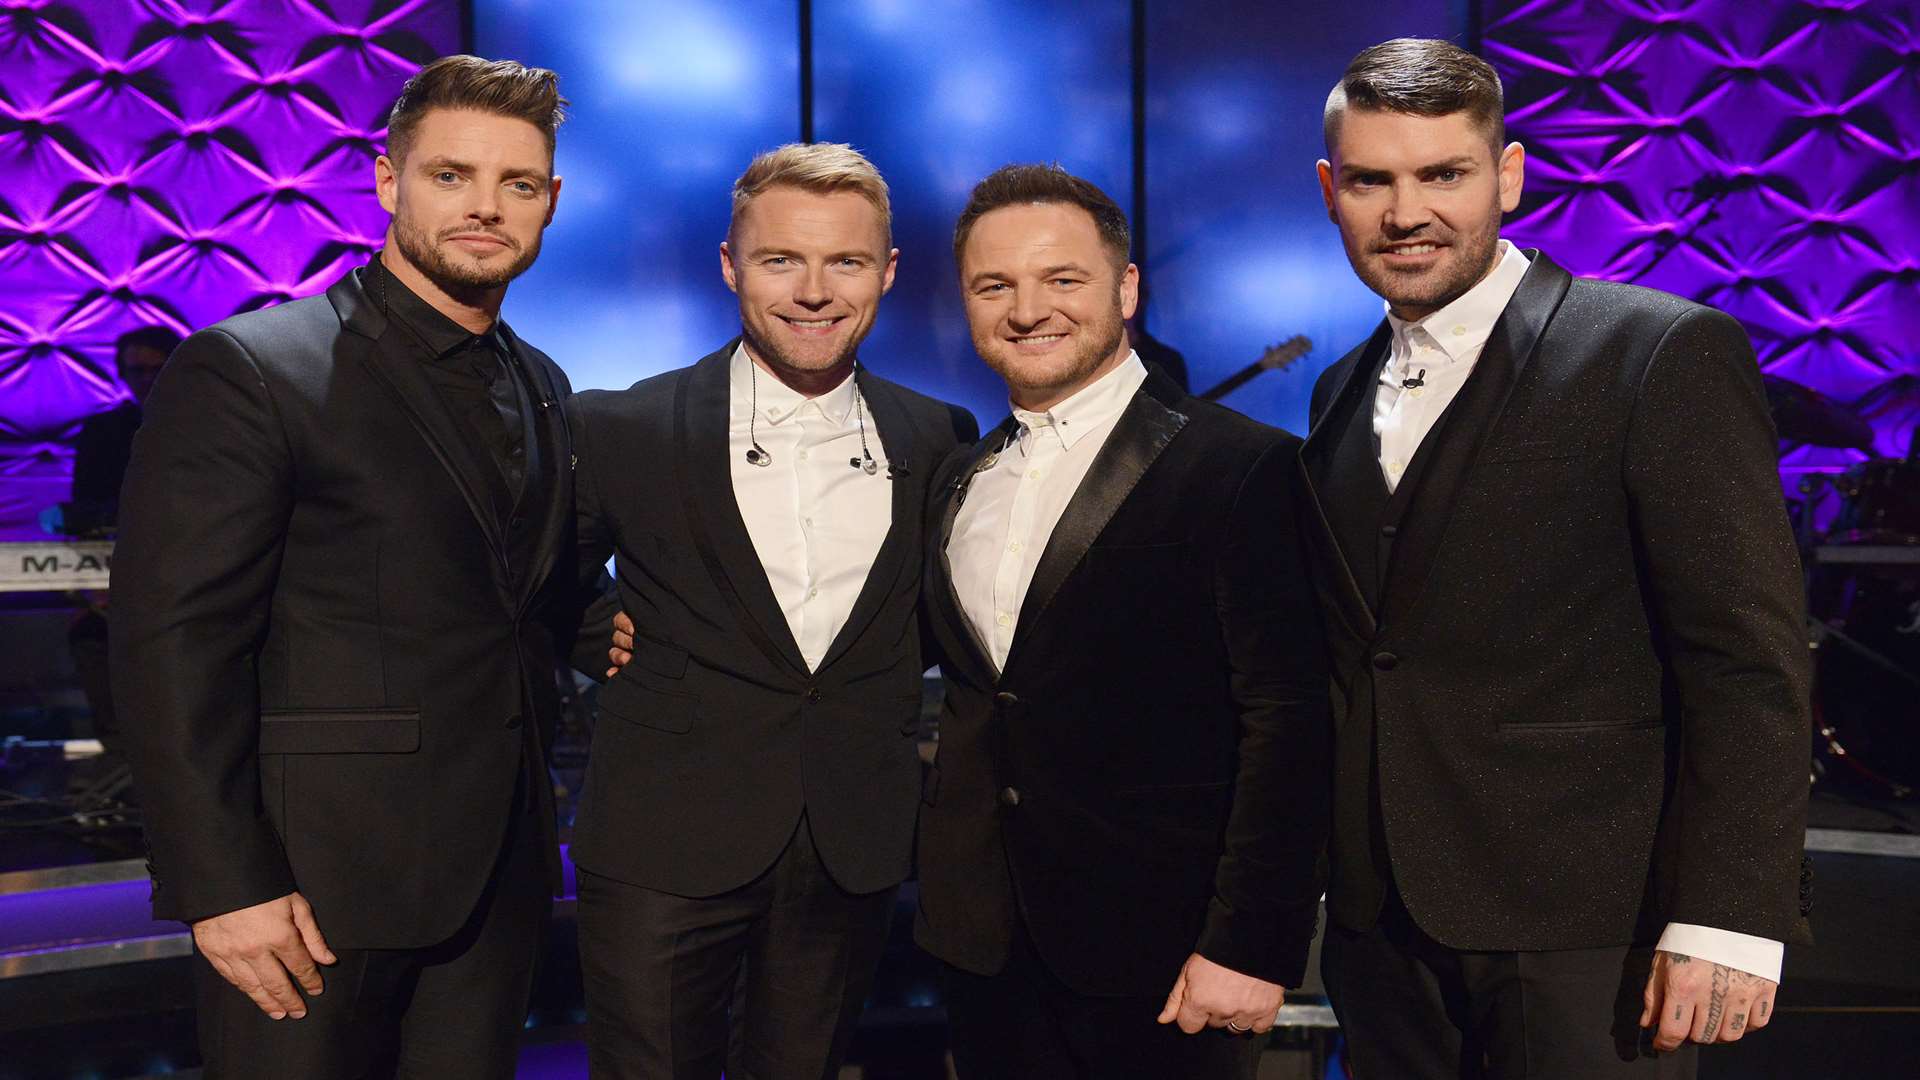 Shane, right, appearing with his Boyzone bandmates